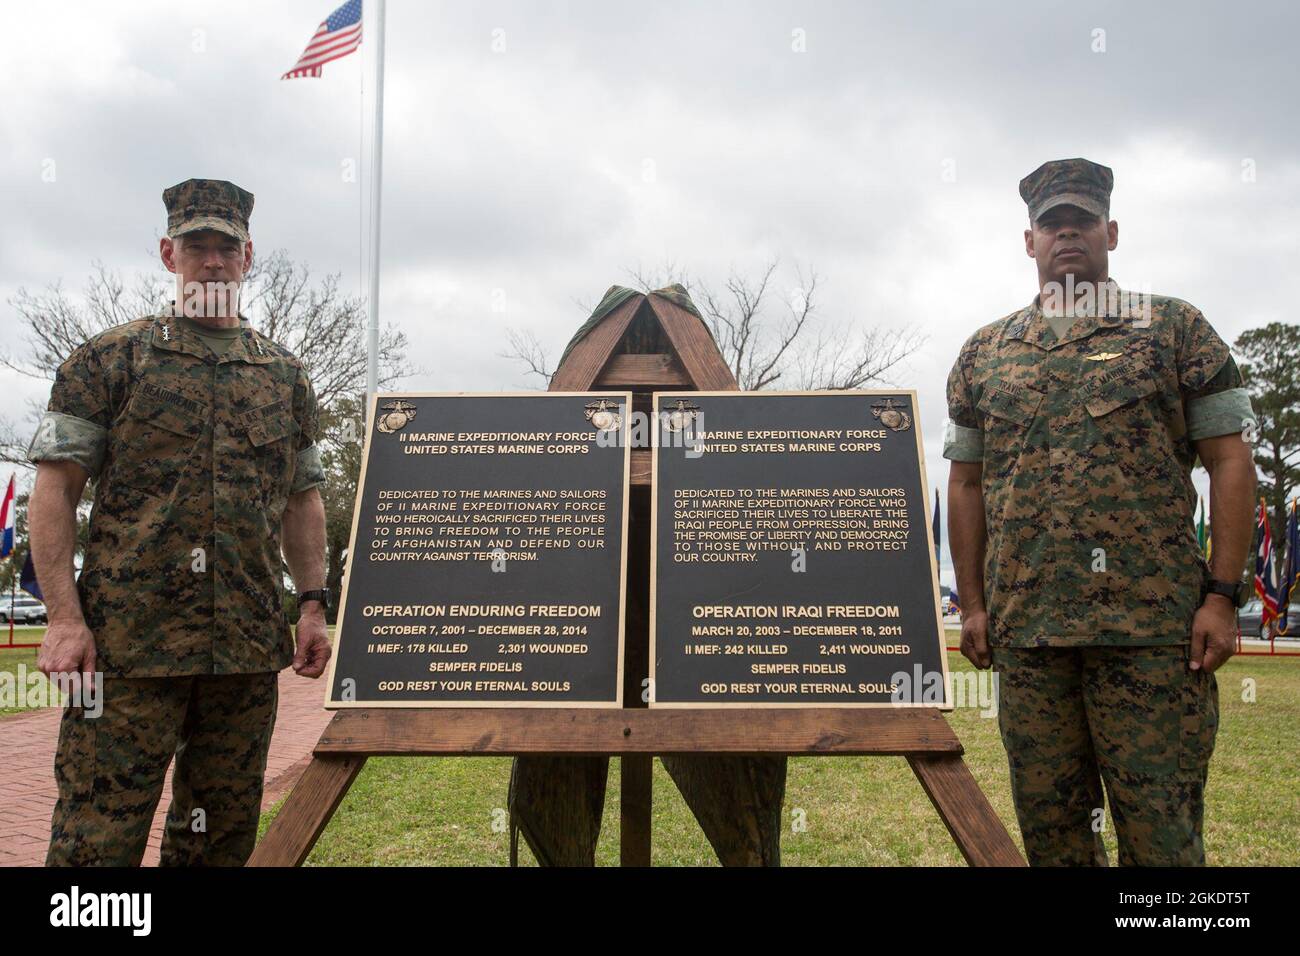 U.S. Marine Corps Lt. Gen. Brian D. Beaudreault, the commanding general of II Marine Expeditionary Force, and Sgt. Maj. Lonnie Travis, the sergeant major of II MEF, pose for a photo in front of the Operation Iraqi Freedom and Operation Enduring Freedom plaques after a dedication ceremony on Marine Corps Base Camp Lejeune, Mar. 24, 2021. This dedication ceremony allows II MEF to carry on the legacy of fallen Marines and sailors by honoring their sacrifice and commemorating their heroic achievement during OIF and OEF. Stock Photo